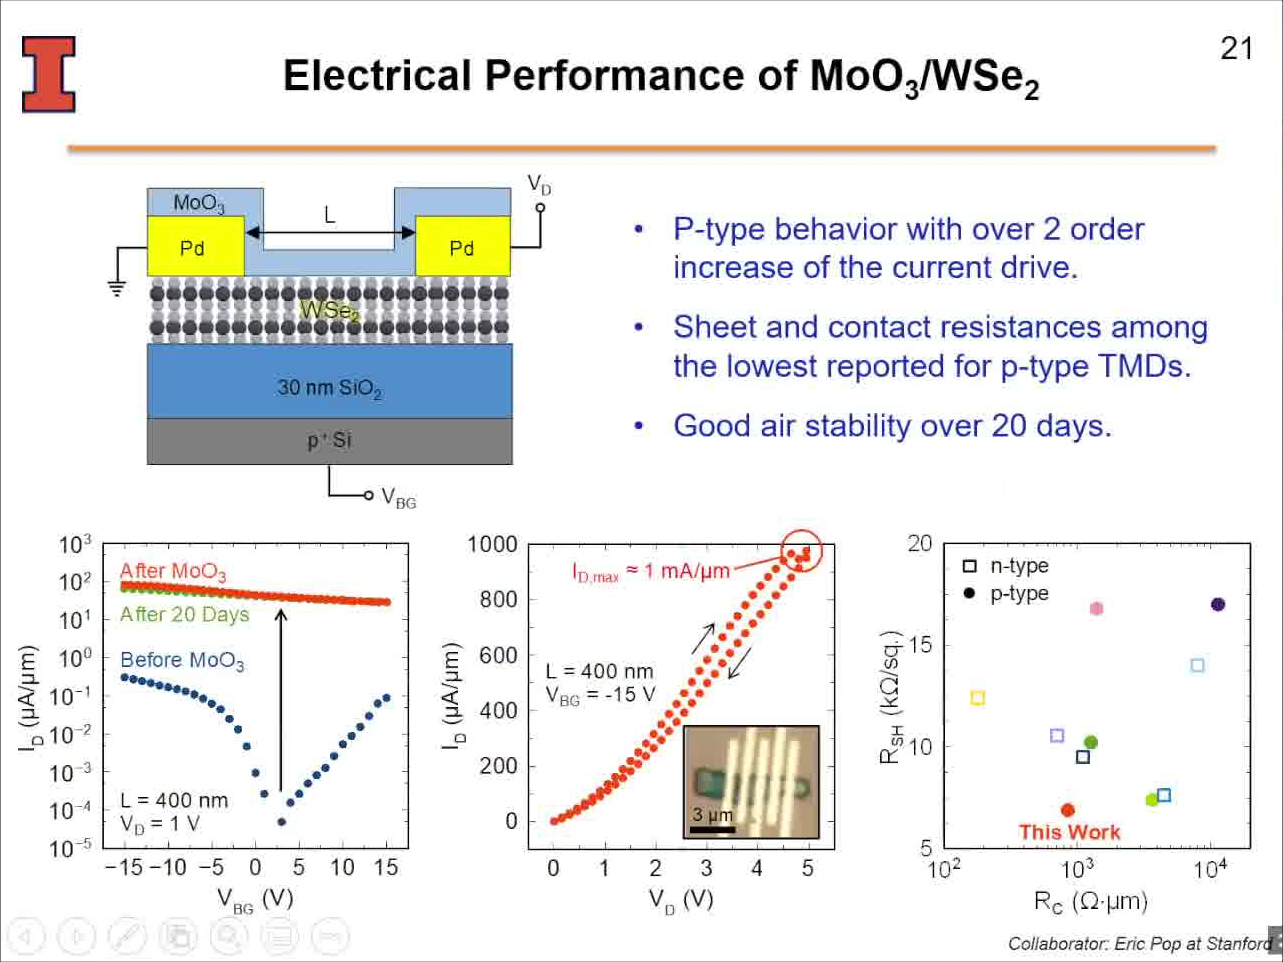 Electrical Performance of MoO3/WSe2